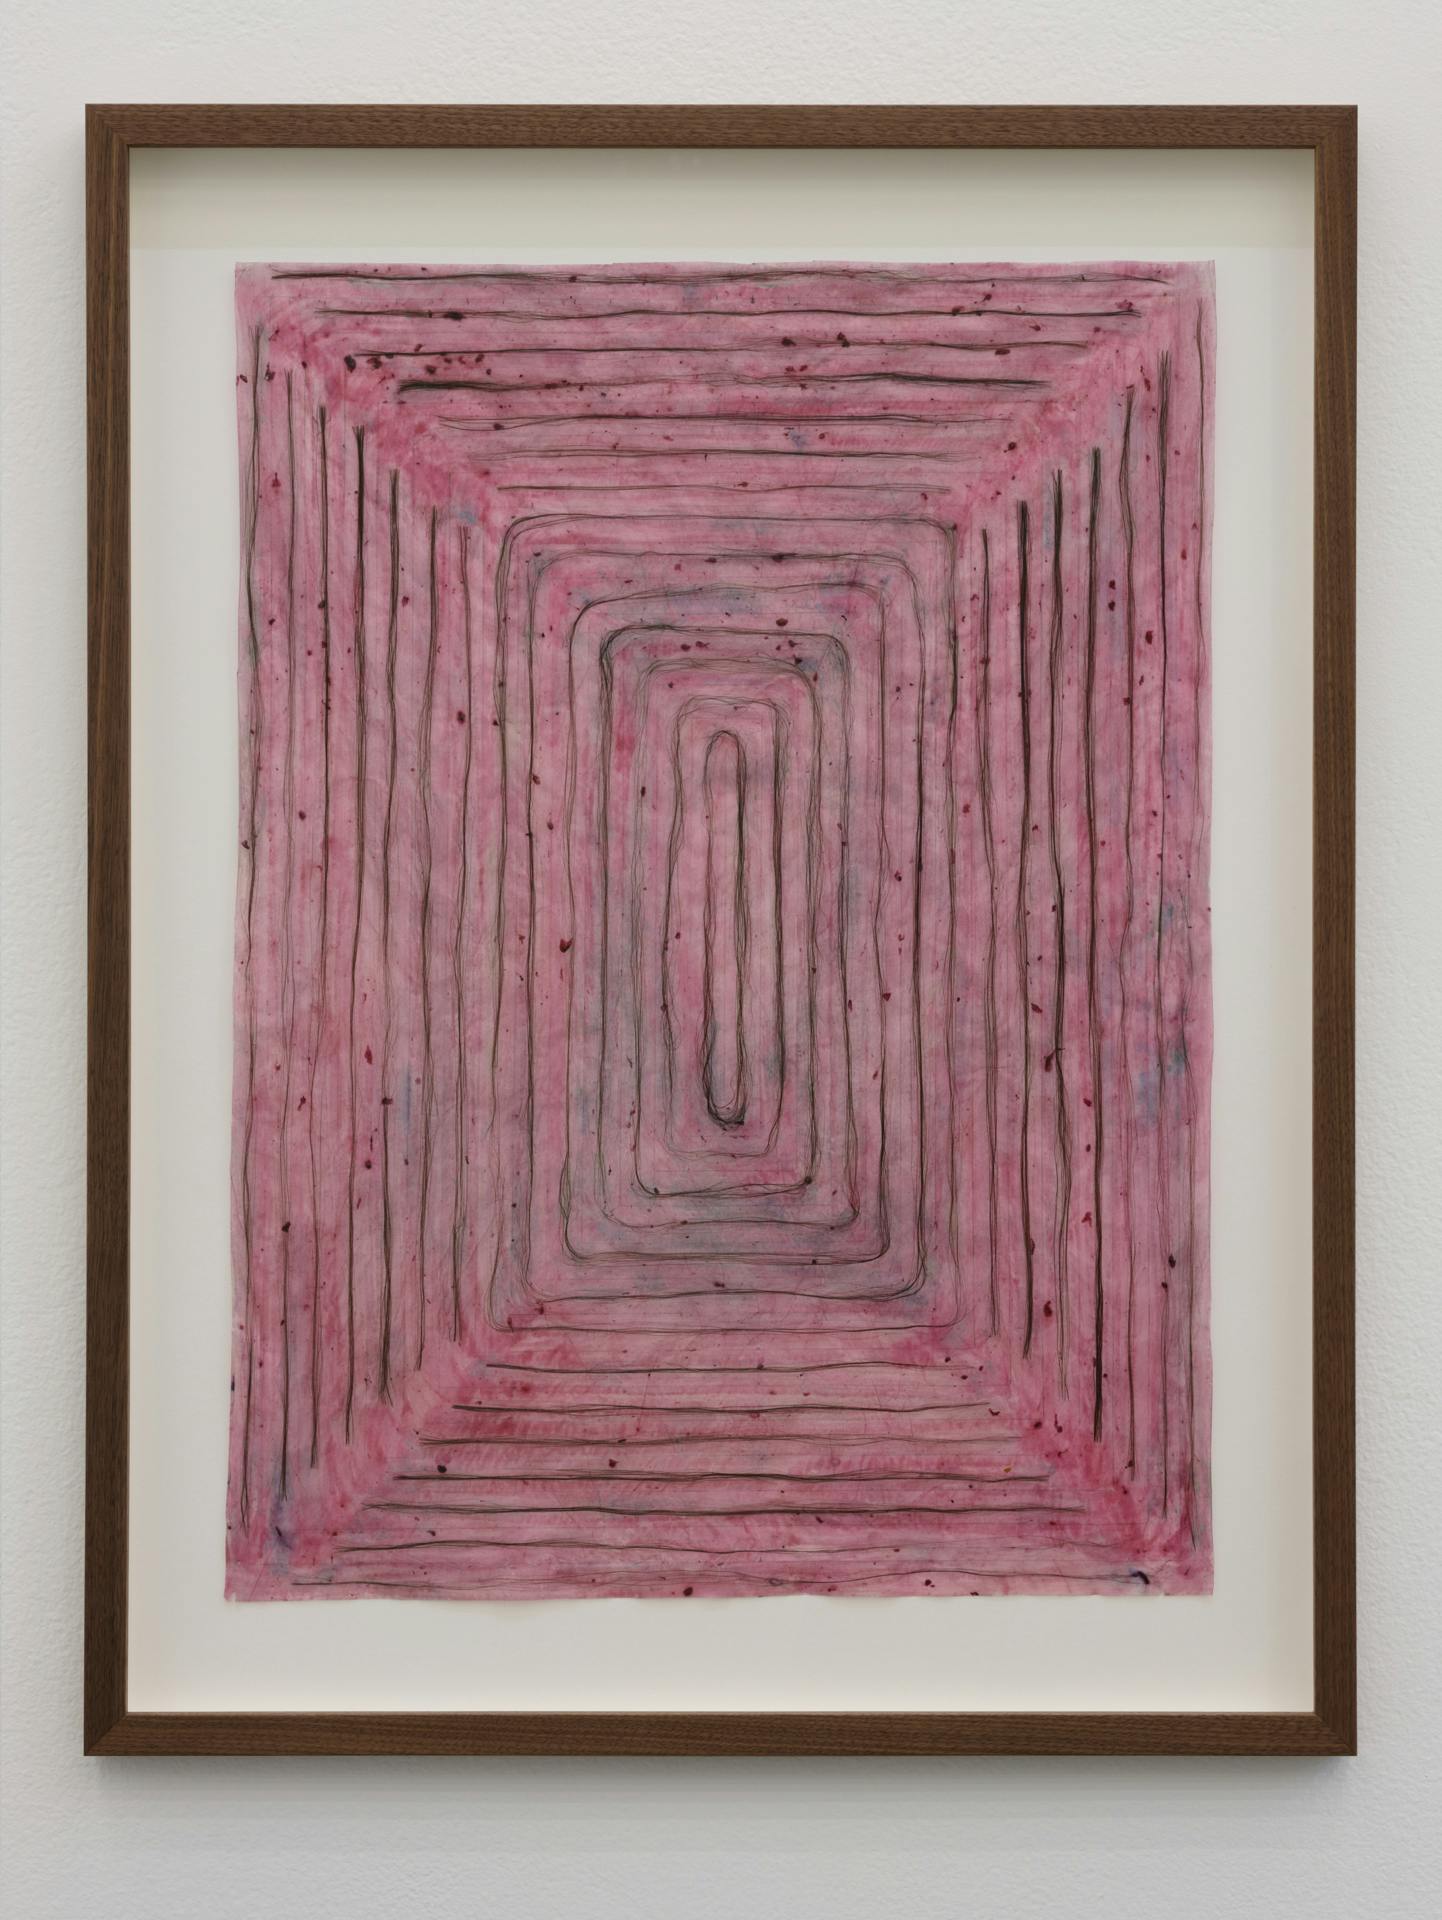 A framed collage with a pink background and drawn lines concentrically repeating edges of the collage into the centre of the image.